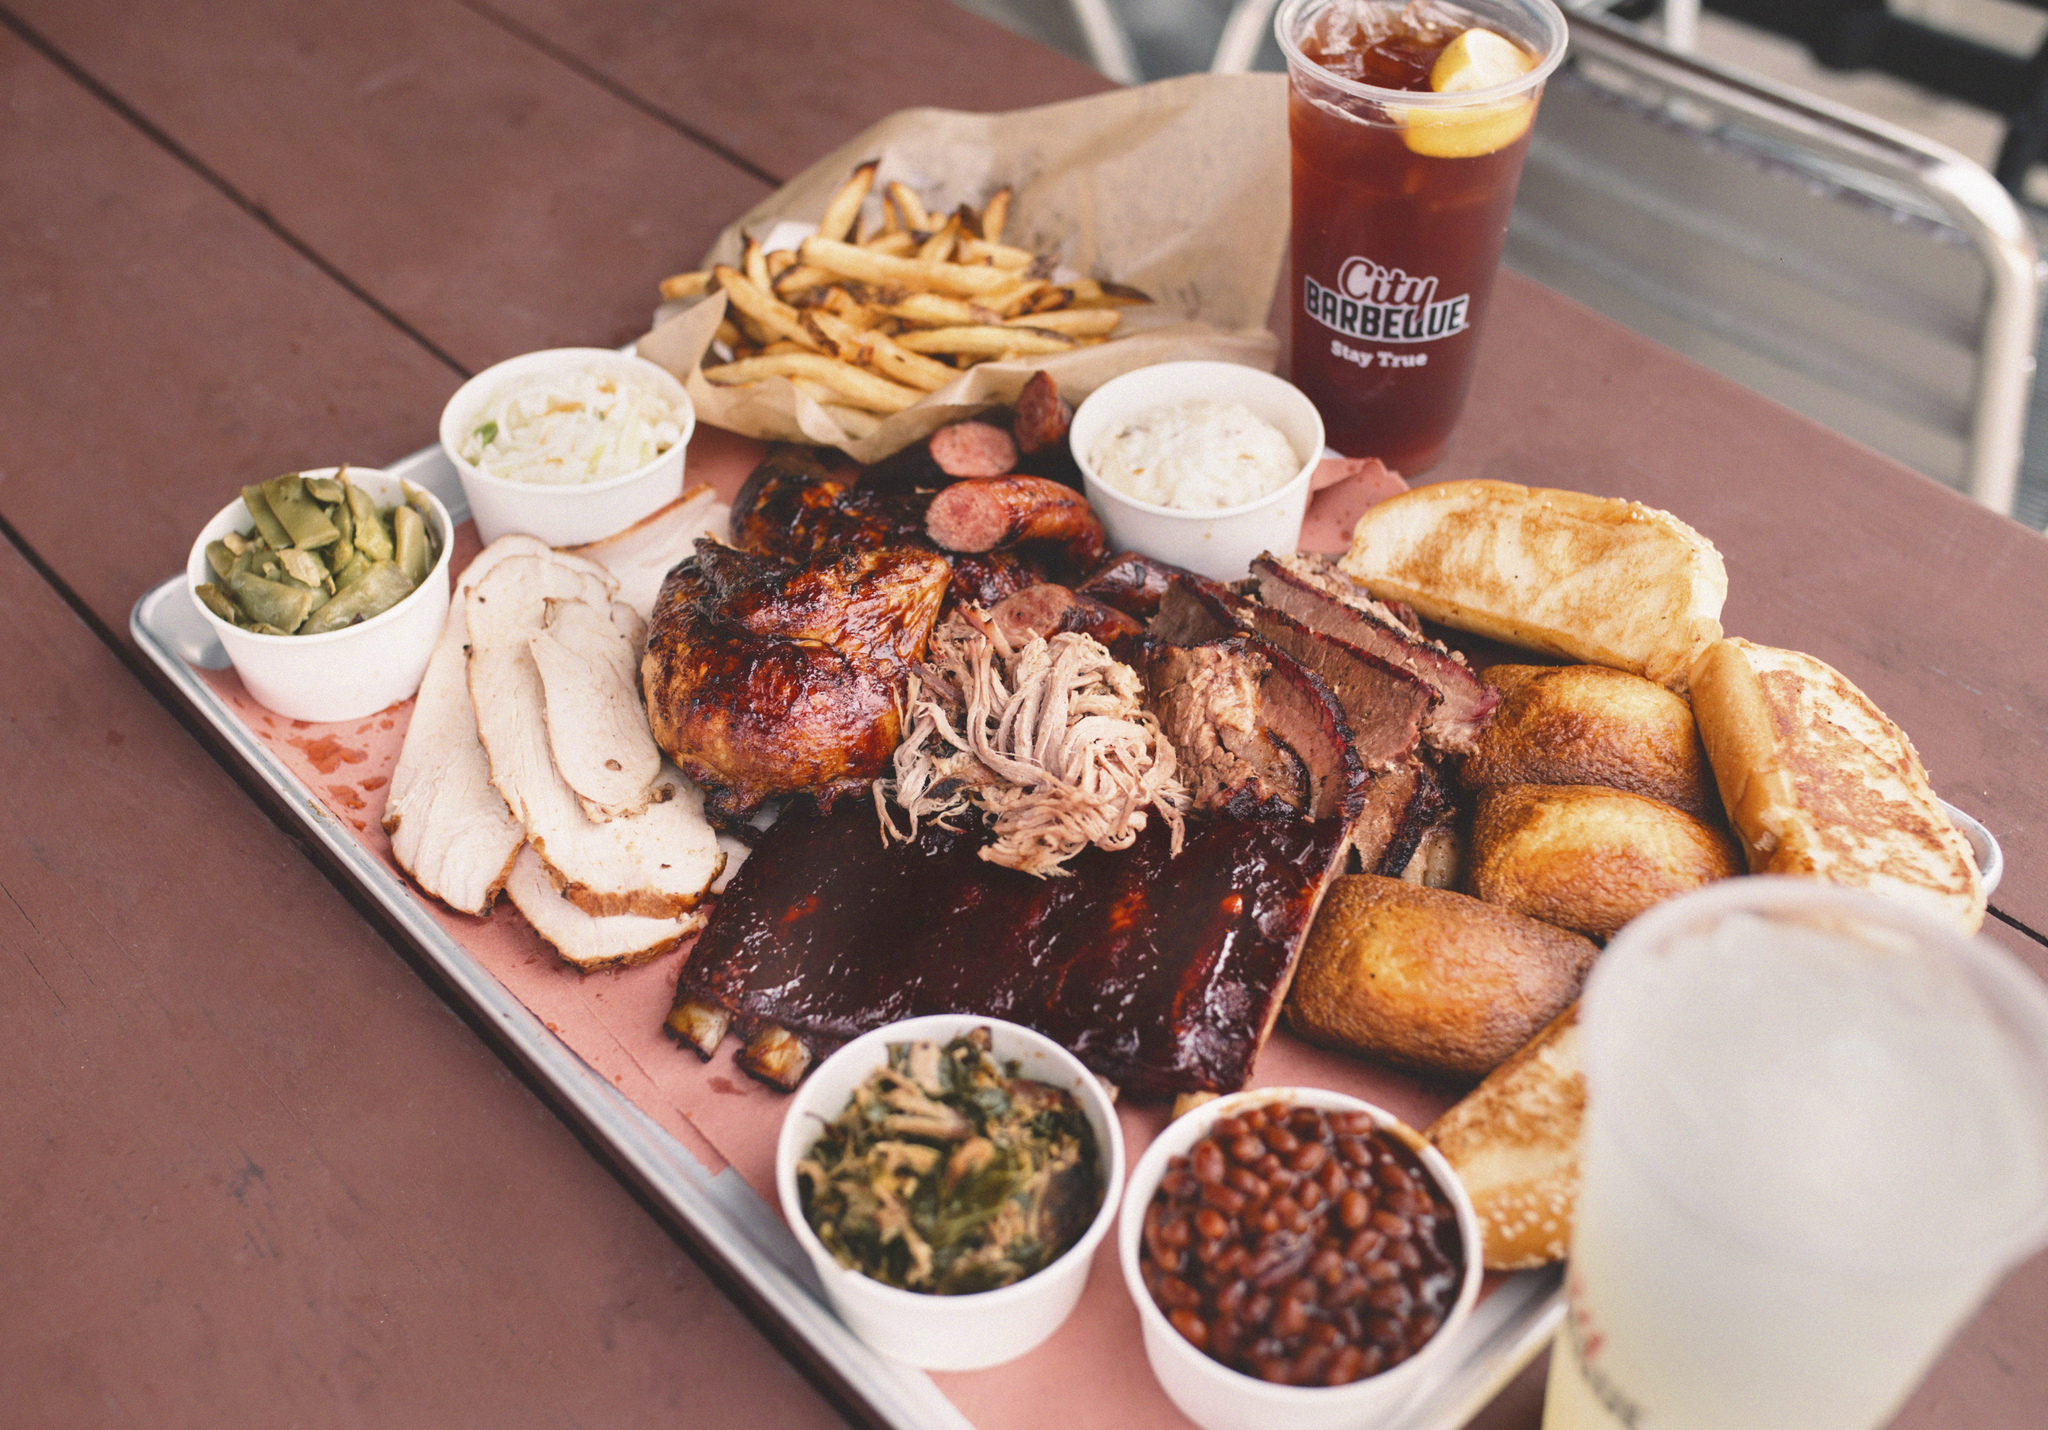 The Mother Load at City BBQ